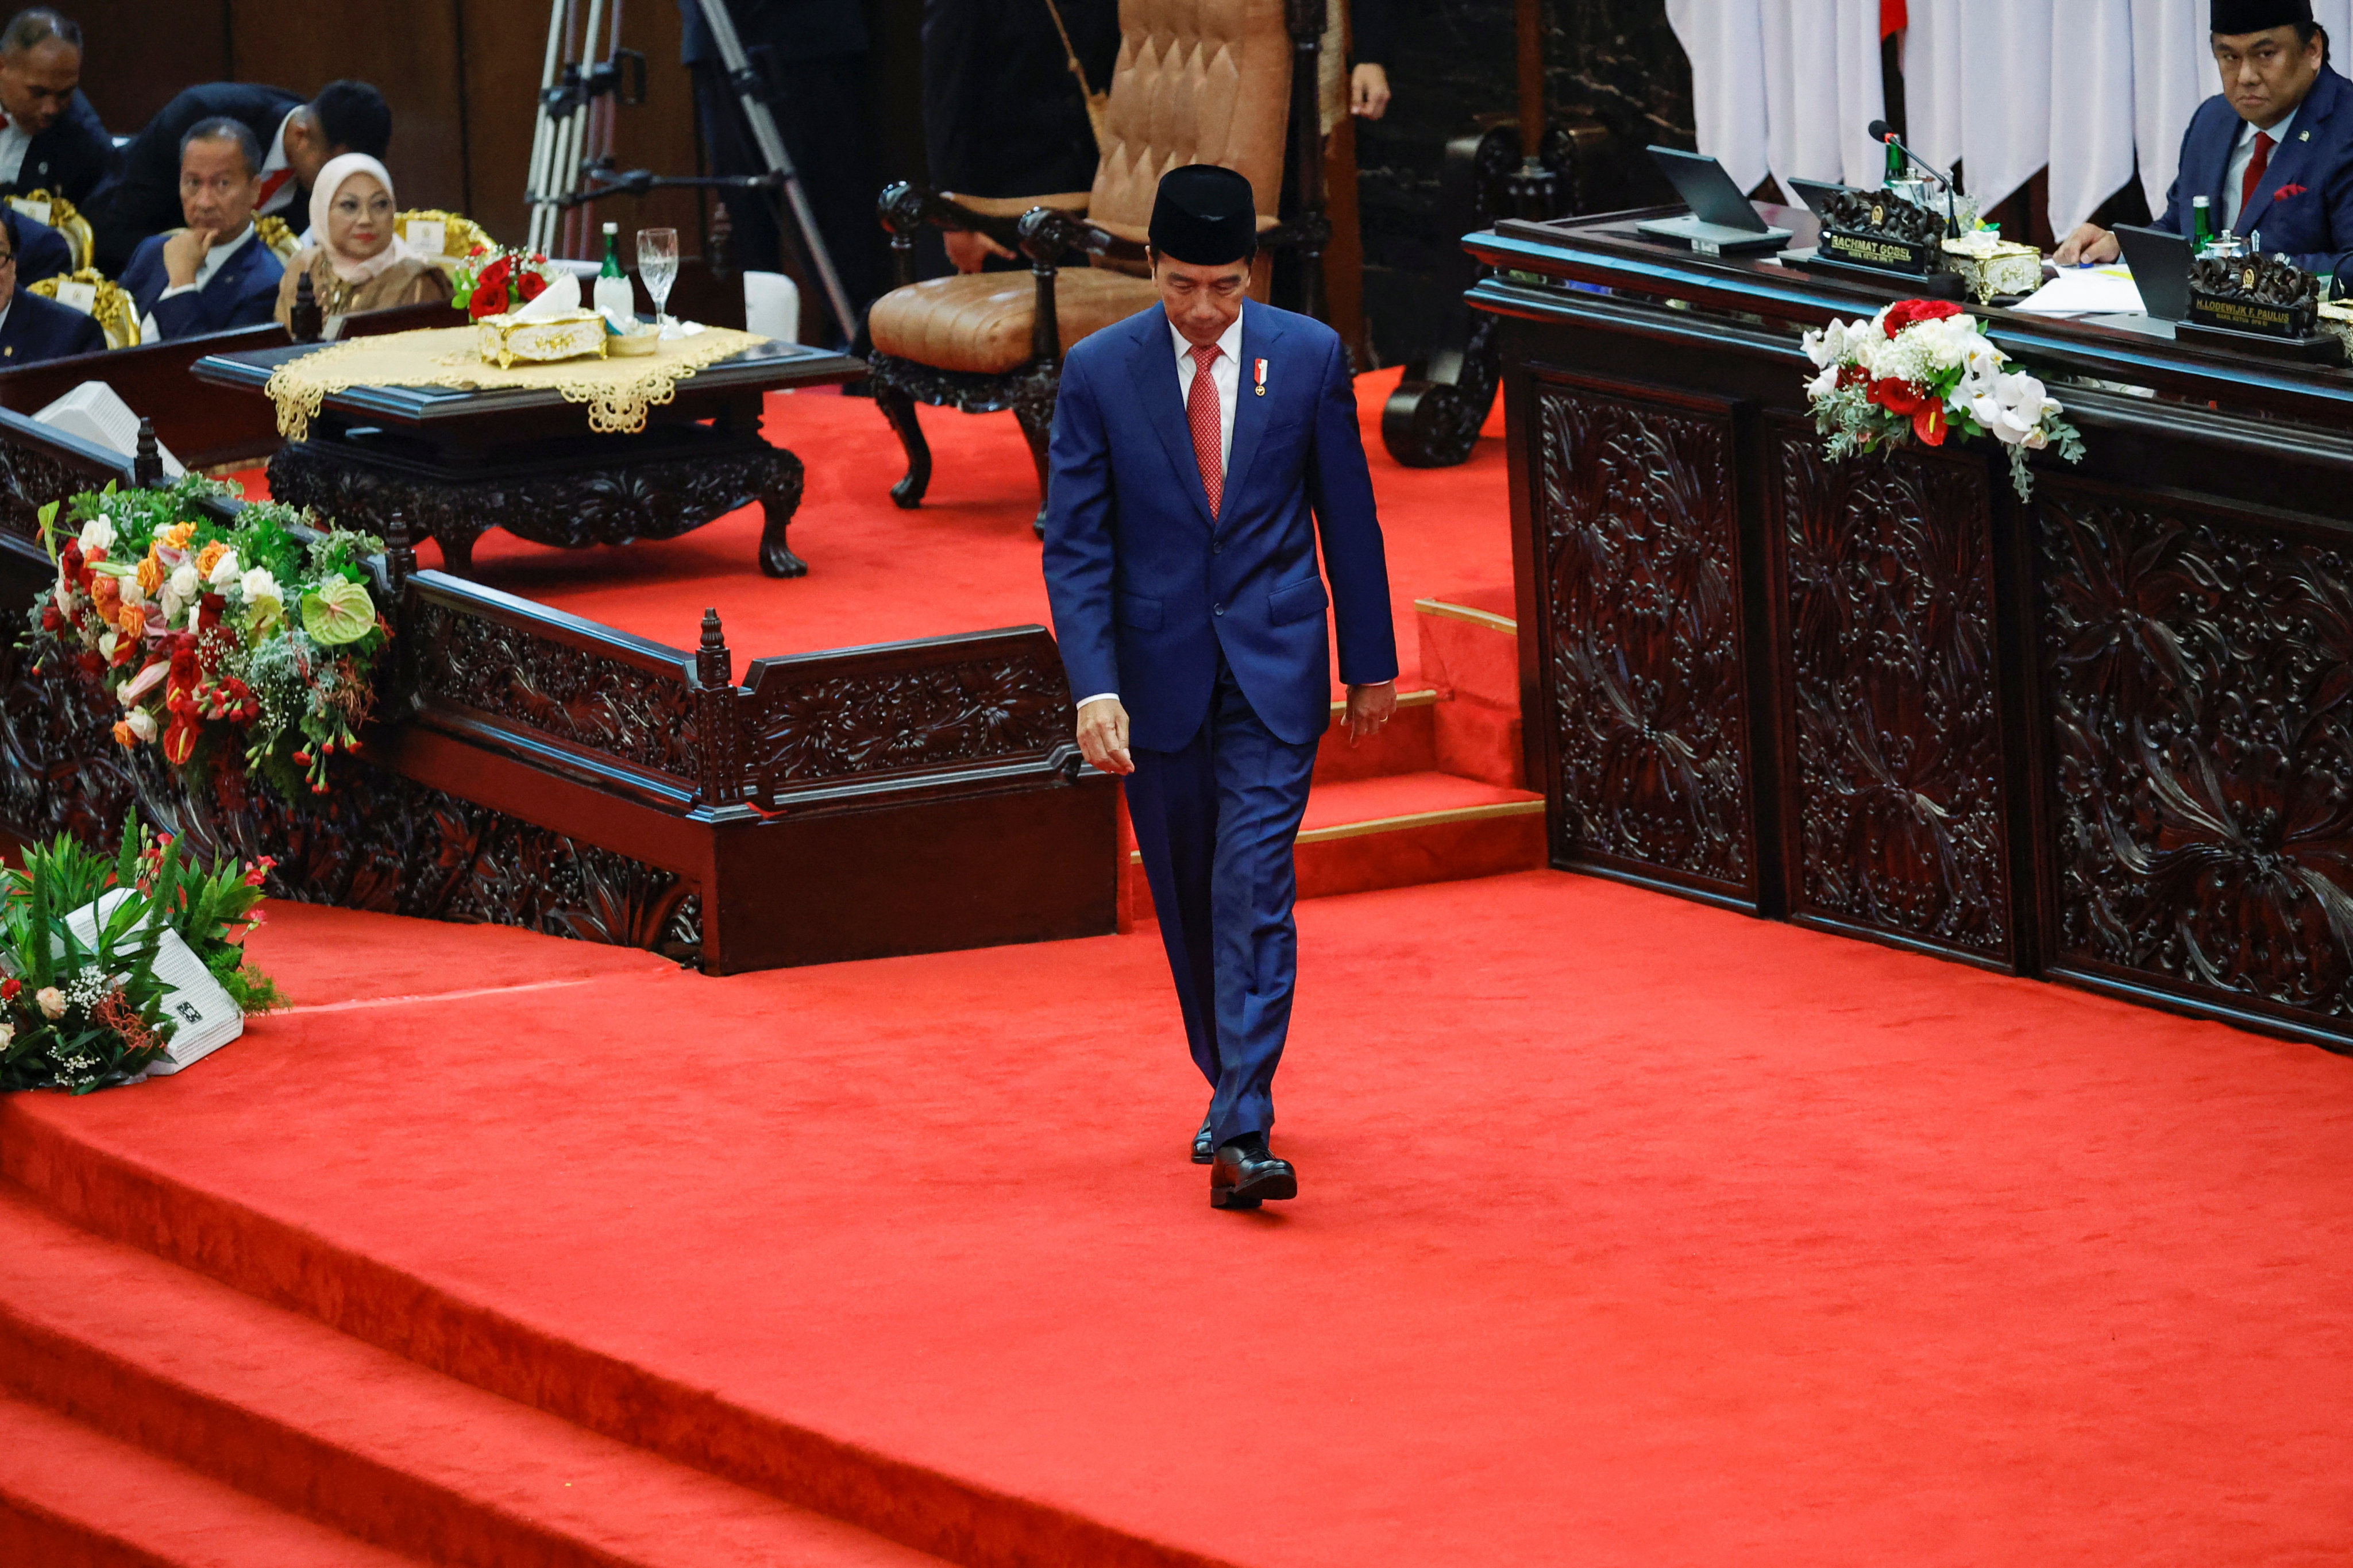 Indonesian President Joko Widodo at the parliament building in Jakarta. Riots could have been avoided if the details of the relocation package were conveyed clearly to residents, he said. Photo: Reuters